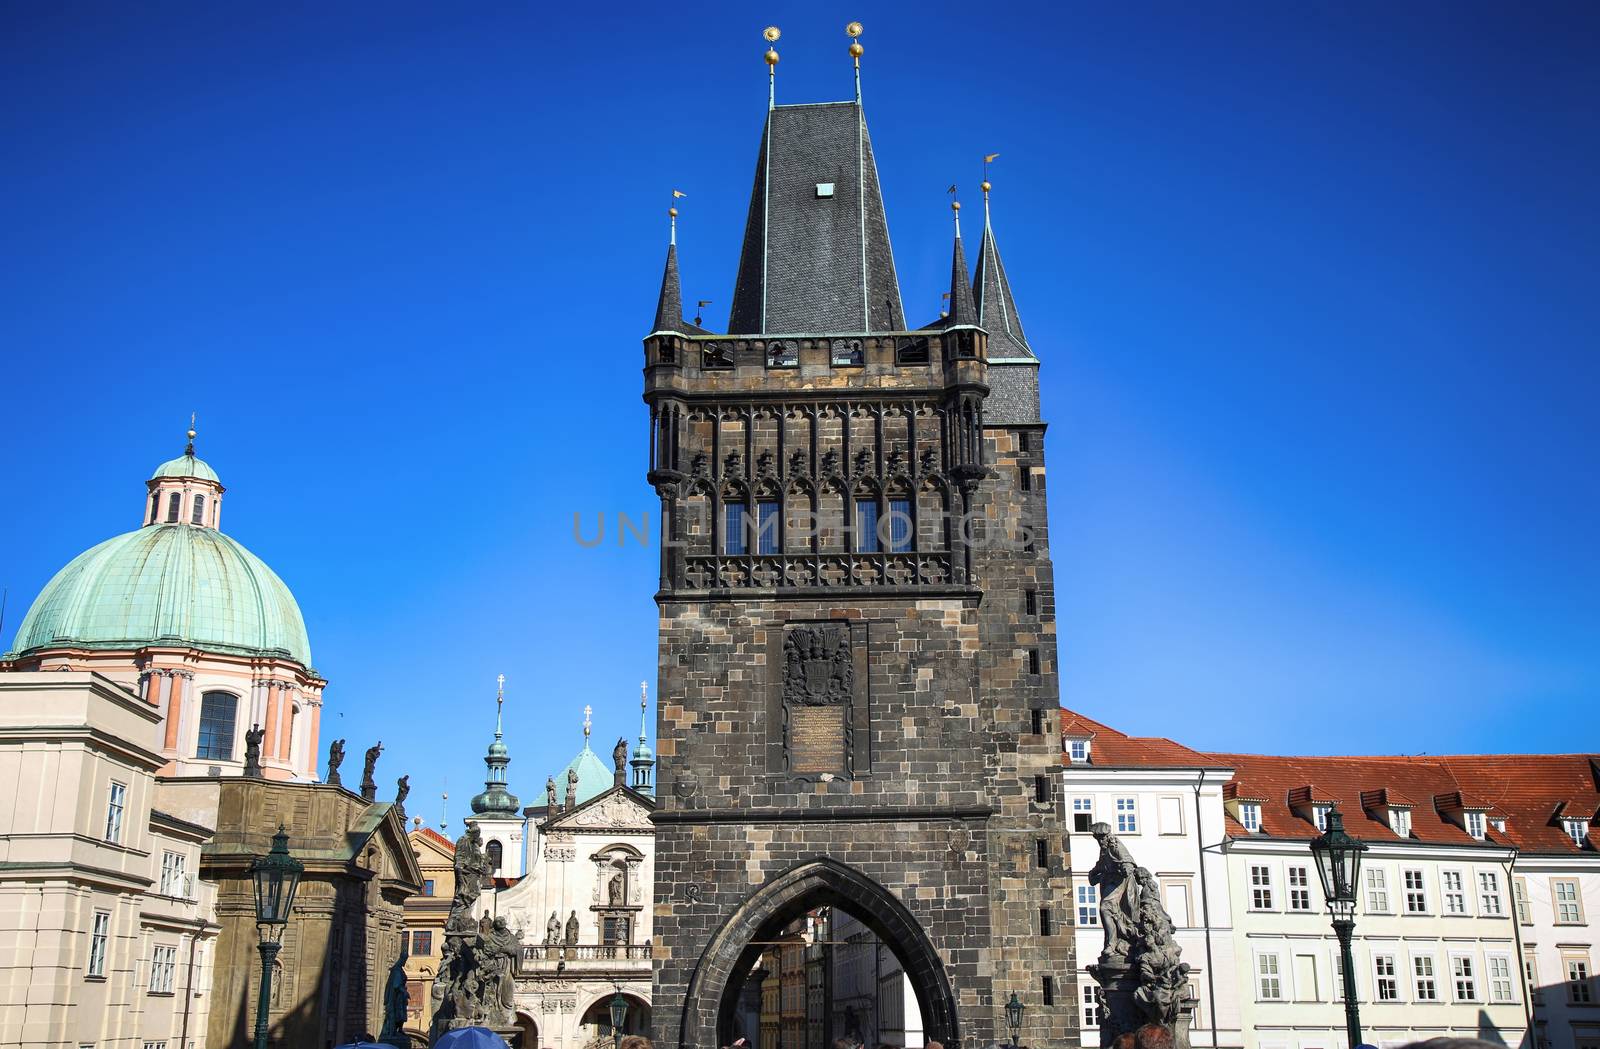 View of the Old Town Bridge Tower (Stare Mesto Tower) from the Charles Bridge (Karluv Most) in Prague, Czech Republic